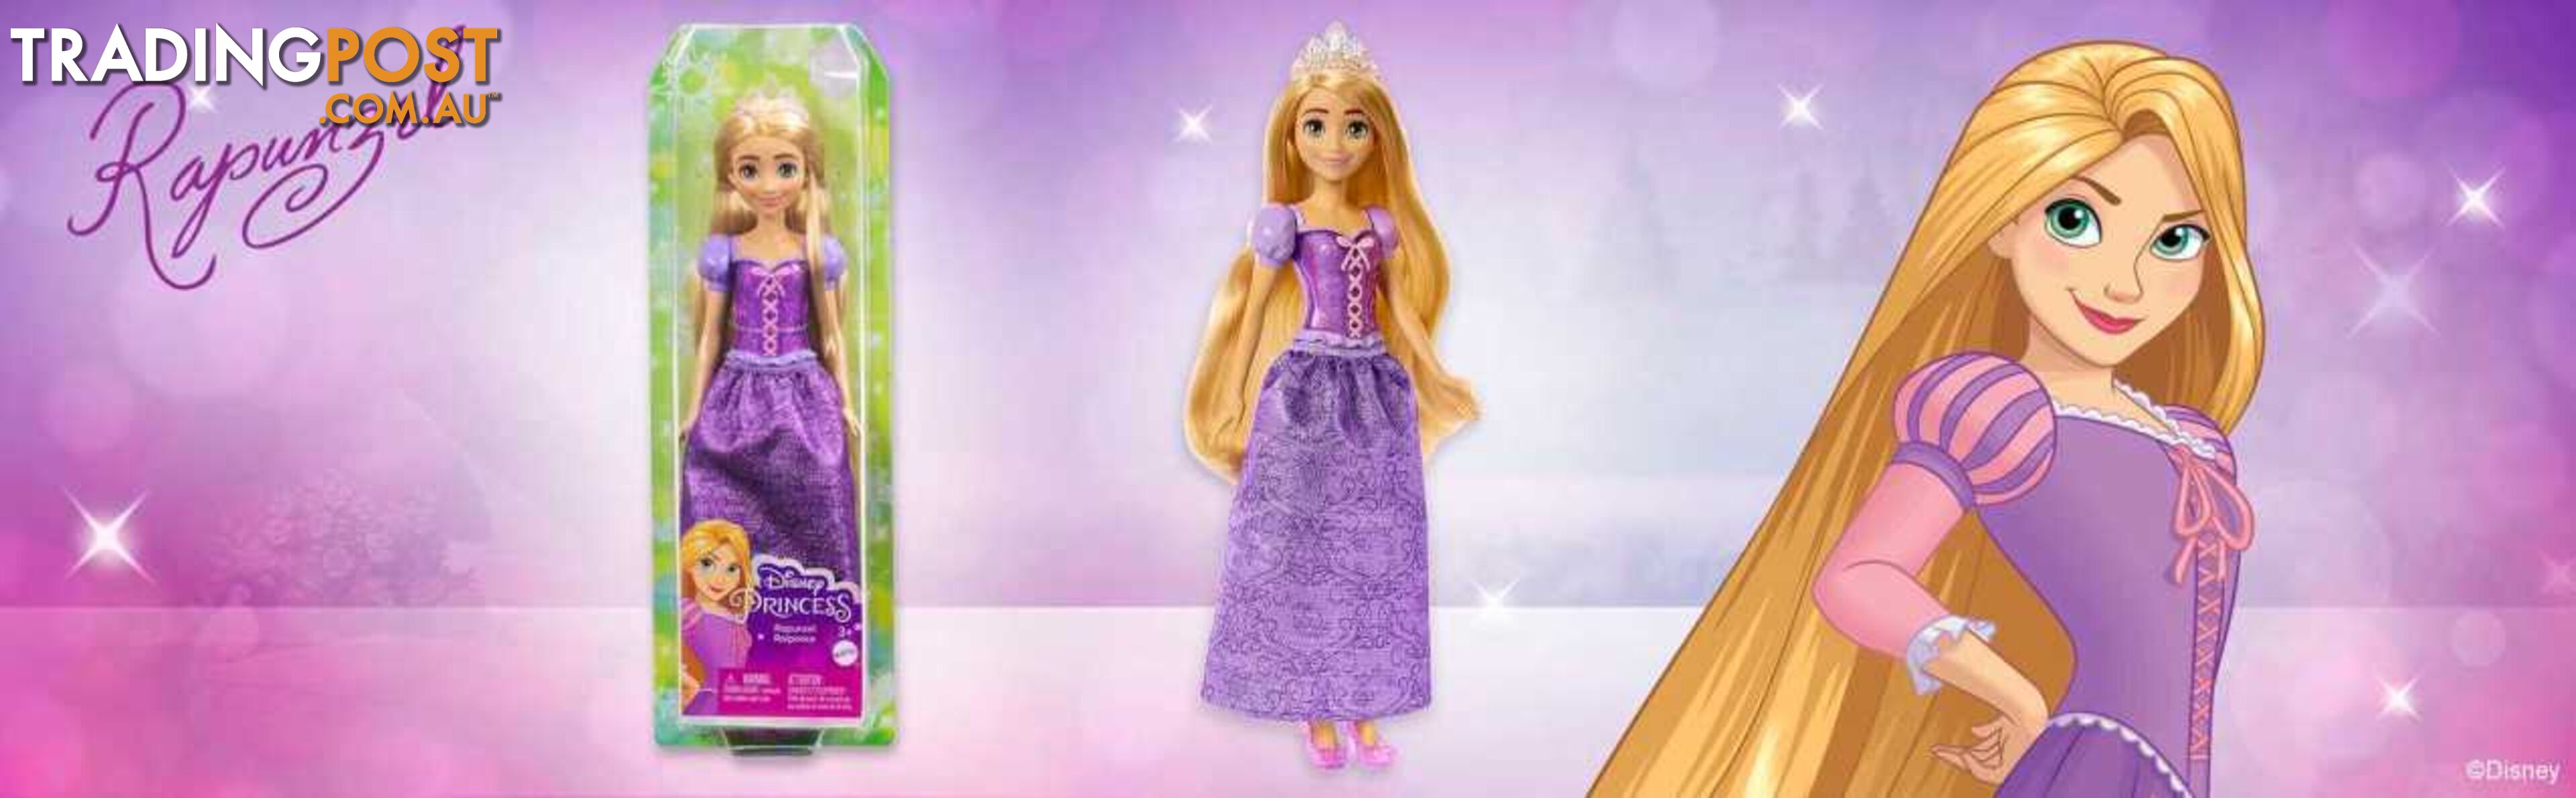 Disney Princess Rapunzel Fashion Doll And Accessories - New For 2023 - Mahlw03 - 194735120307